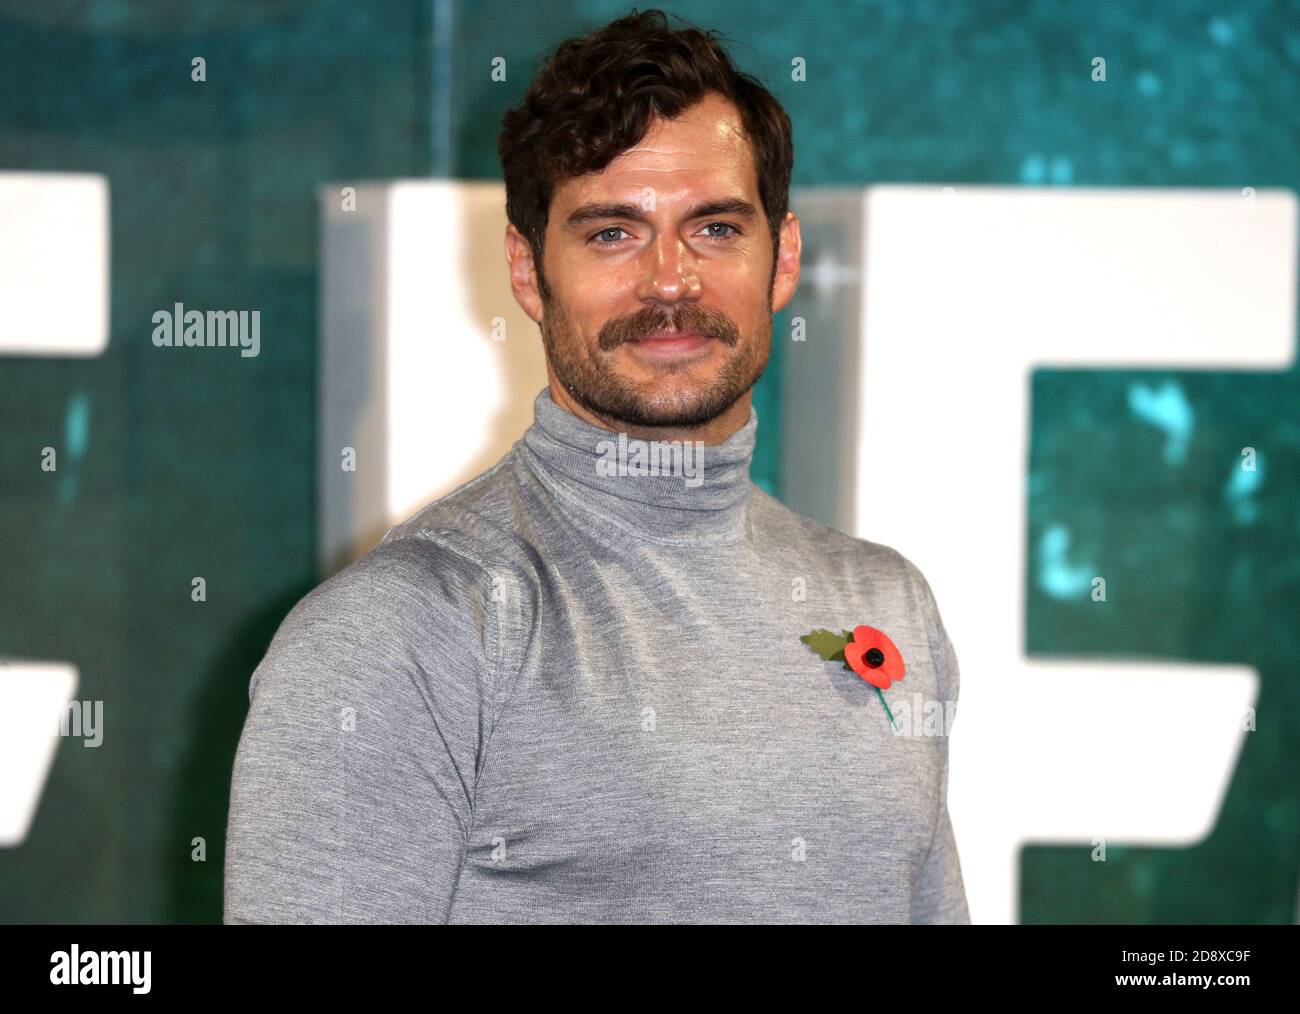 LONDON, UNITED KINGDOM - Sep 30, 2020: Henry Cavill attends the 'Justice League' photocall at The College on November 4, 2017 in London, England. Stock Photo